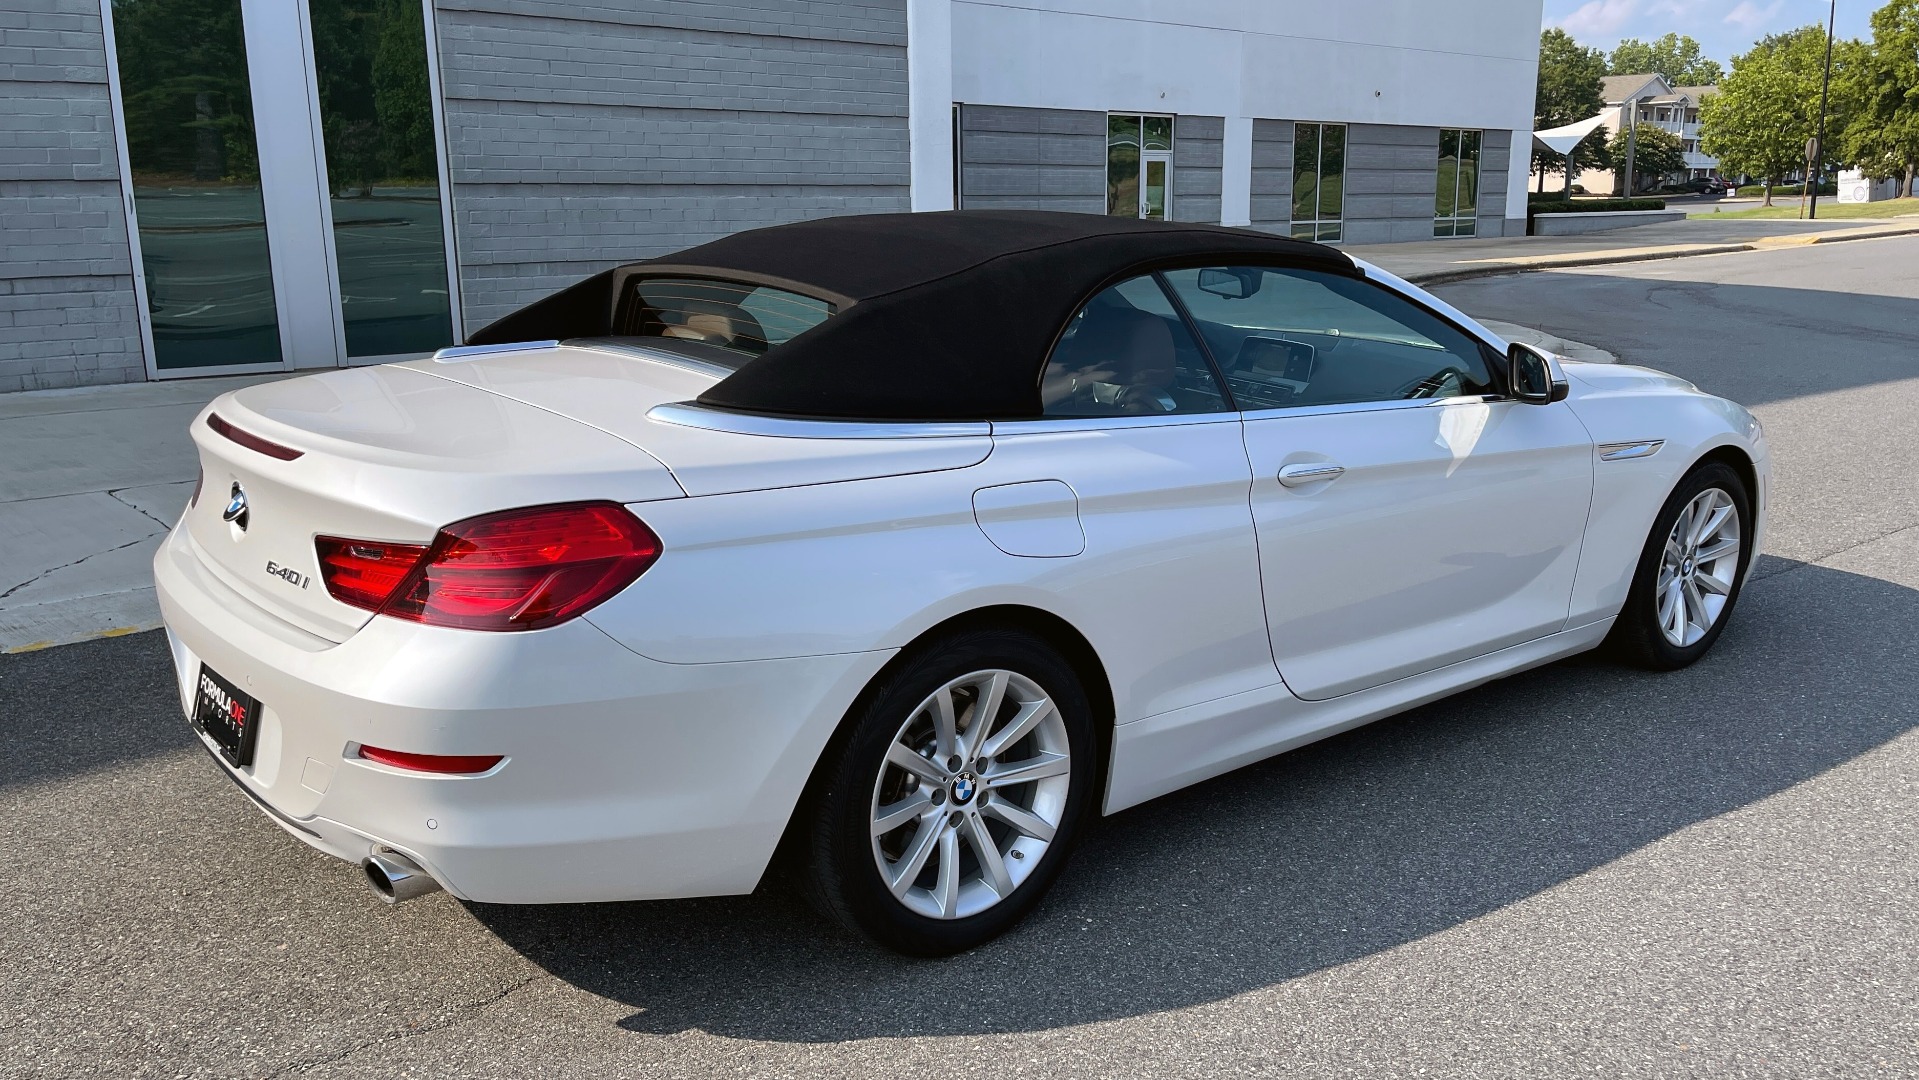 Used 2016 BMW 6 SERIES 640I CONVERTIBLE / 3.0L I6 / 8-SPD AUTO / RWD / NAV / REARVIEW for sale Sold at Formula Imports in Charlotte NC 28227 13